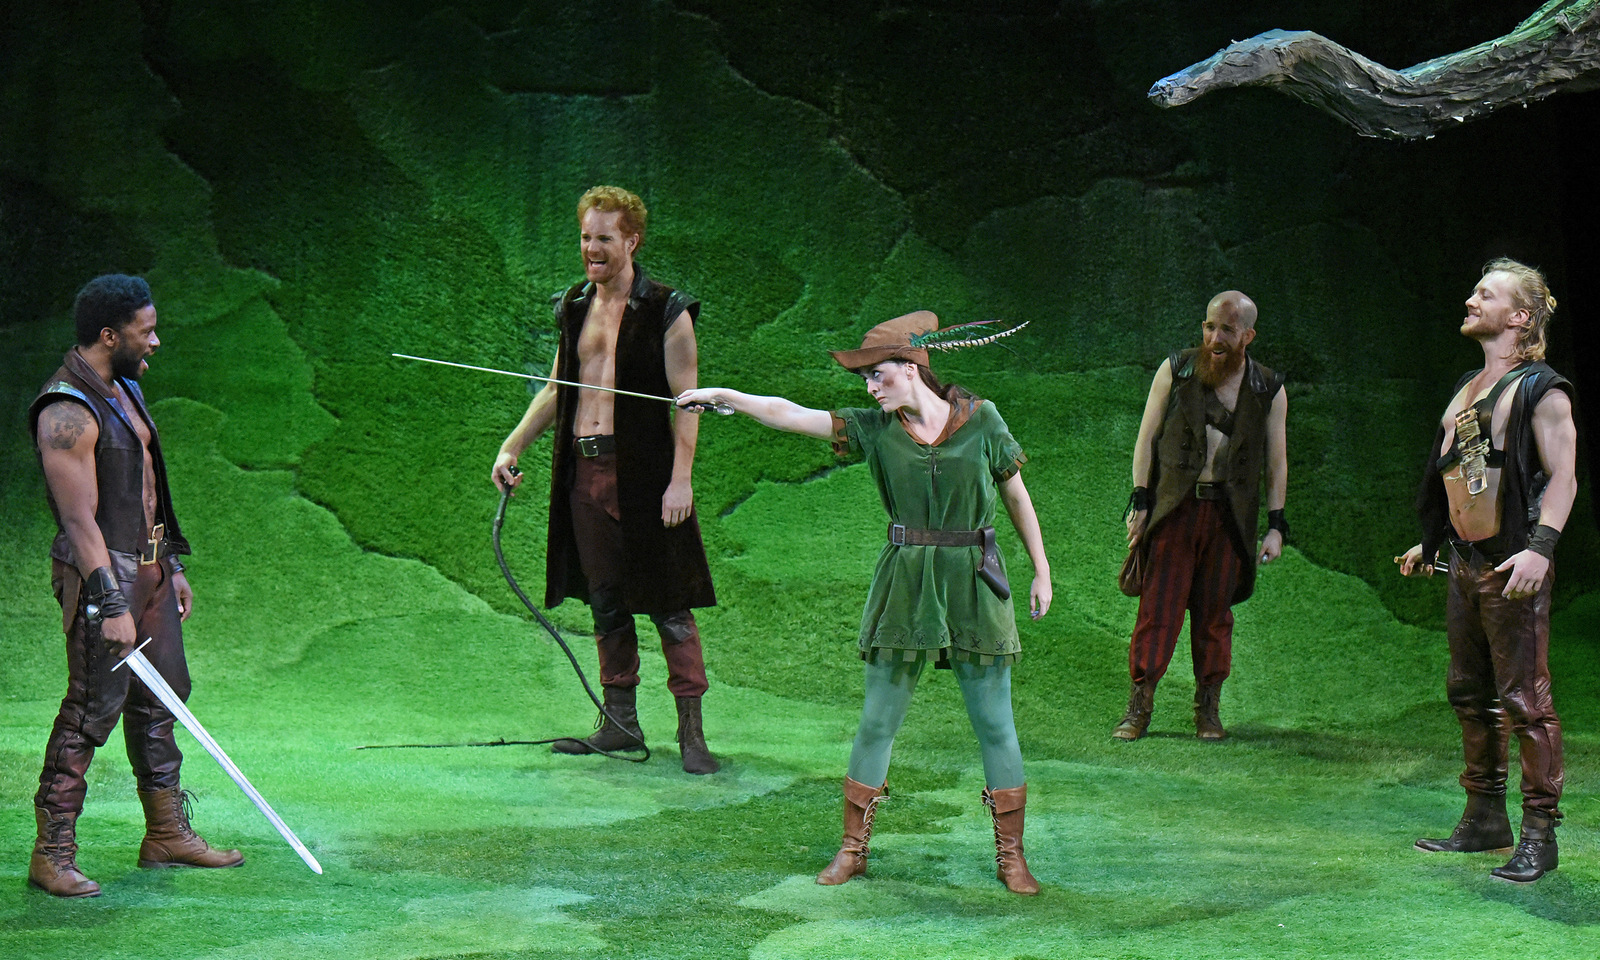 Vesturport and The Wallis’ The Heart of Robin Hood. Pictured (l-r): Luke Forbes, Kasey Mahaffy, Christina Bennett Lind, Jeremy Crawford, and Sam Meader. Photo credit: Kevin Parry for Th